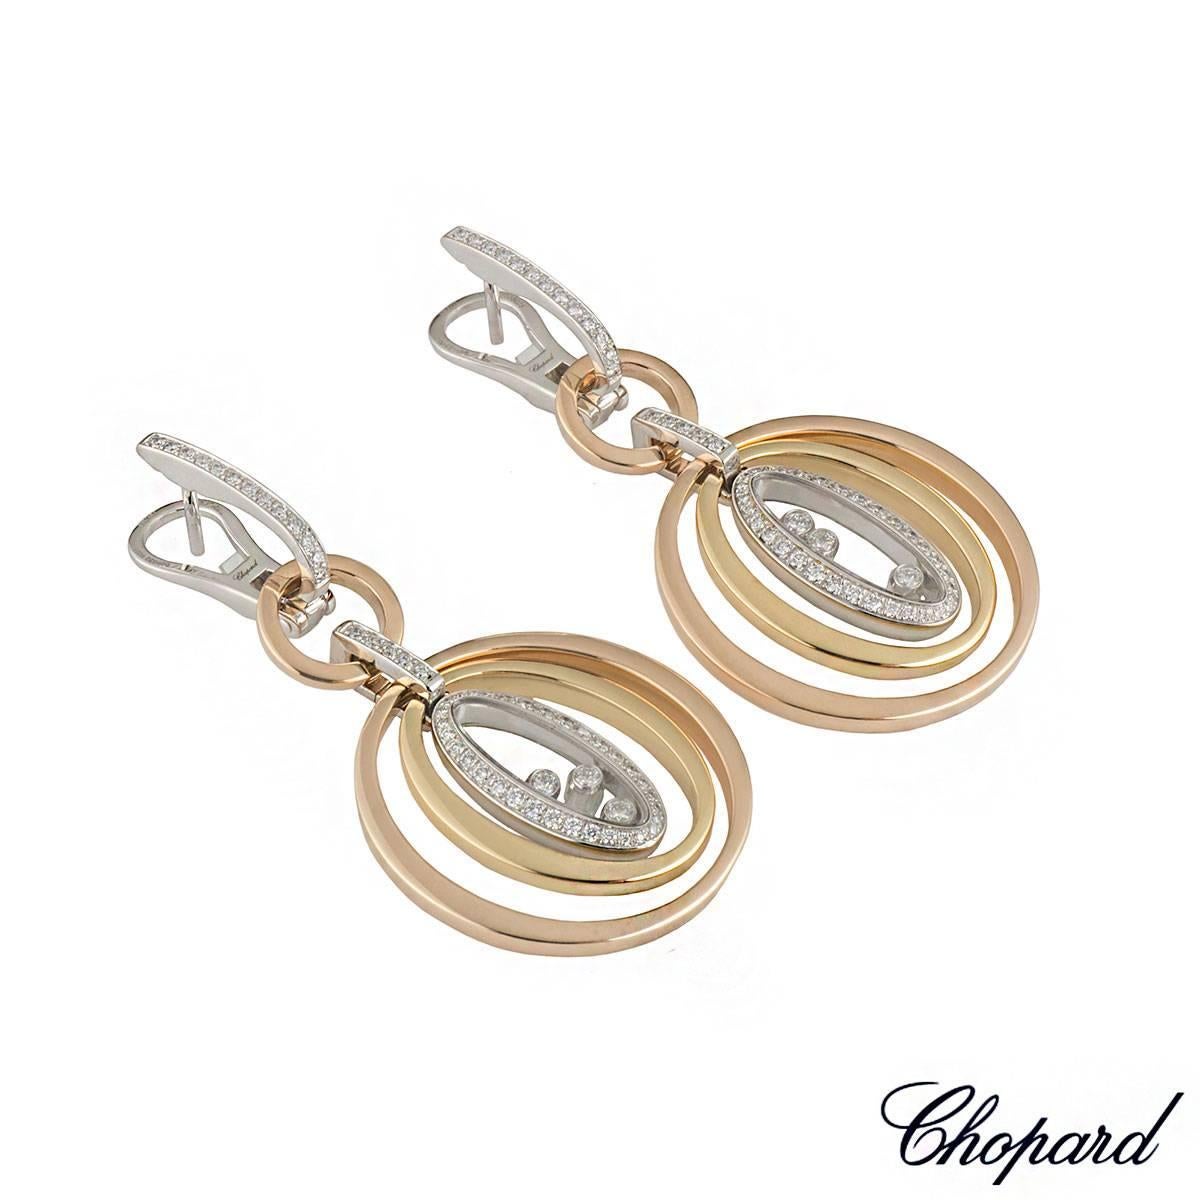 A stylish 18k tri-colour Chopard drop earrings from the Happy Diamonds collection. The earrings comprises of a hoop with round brilliant cut diamonds in a claw setting complemented with 3 circular motifs freely moving inside one another. The centre